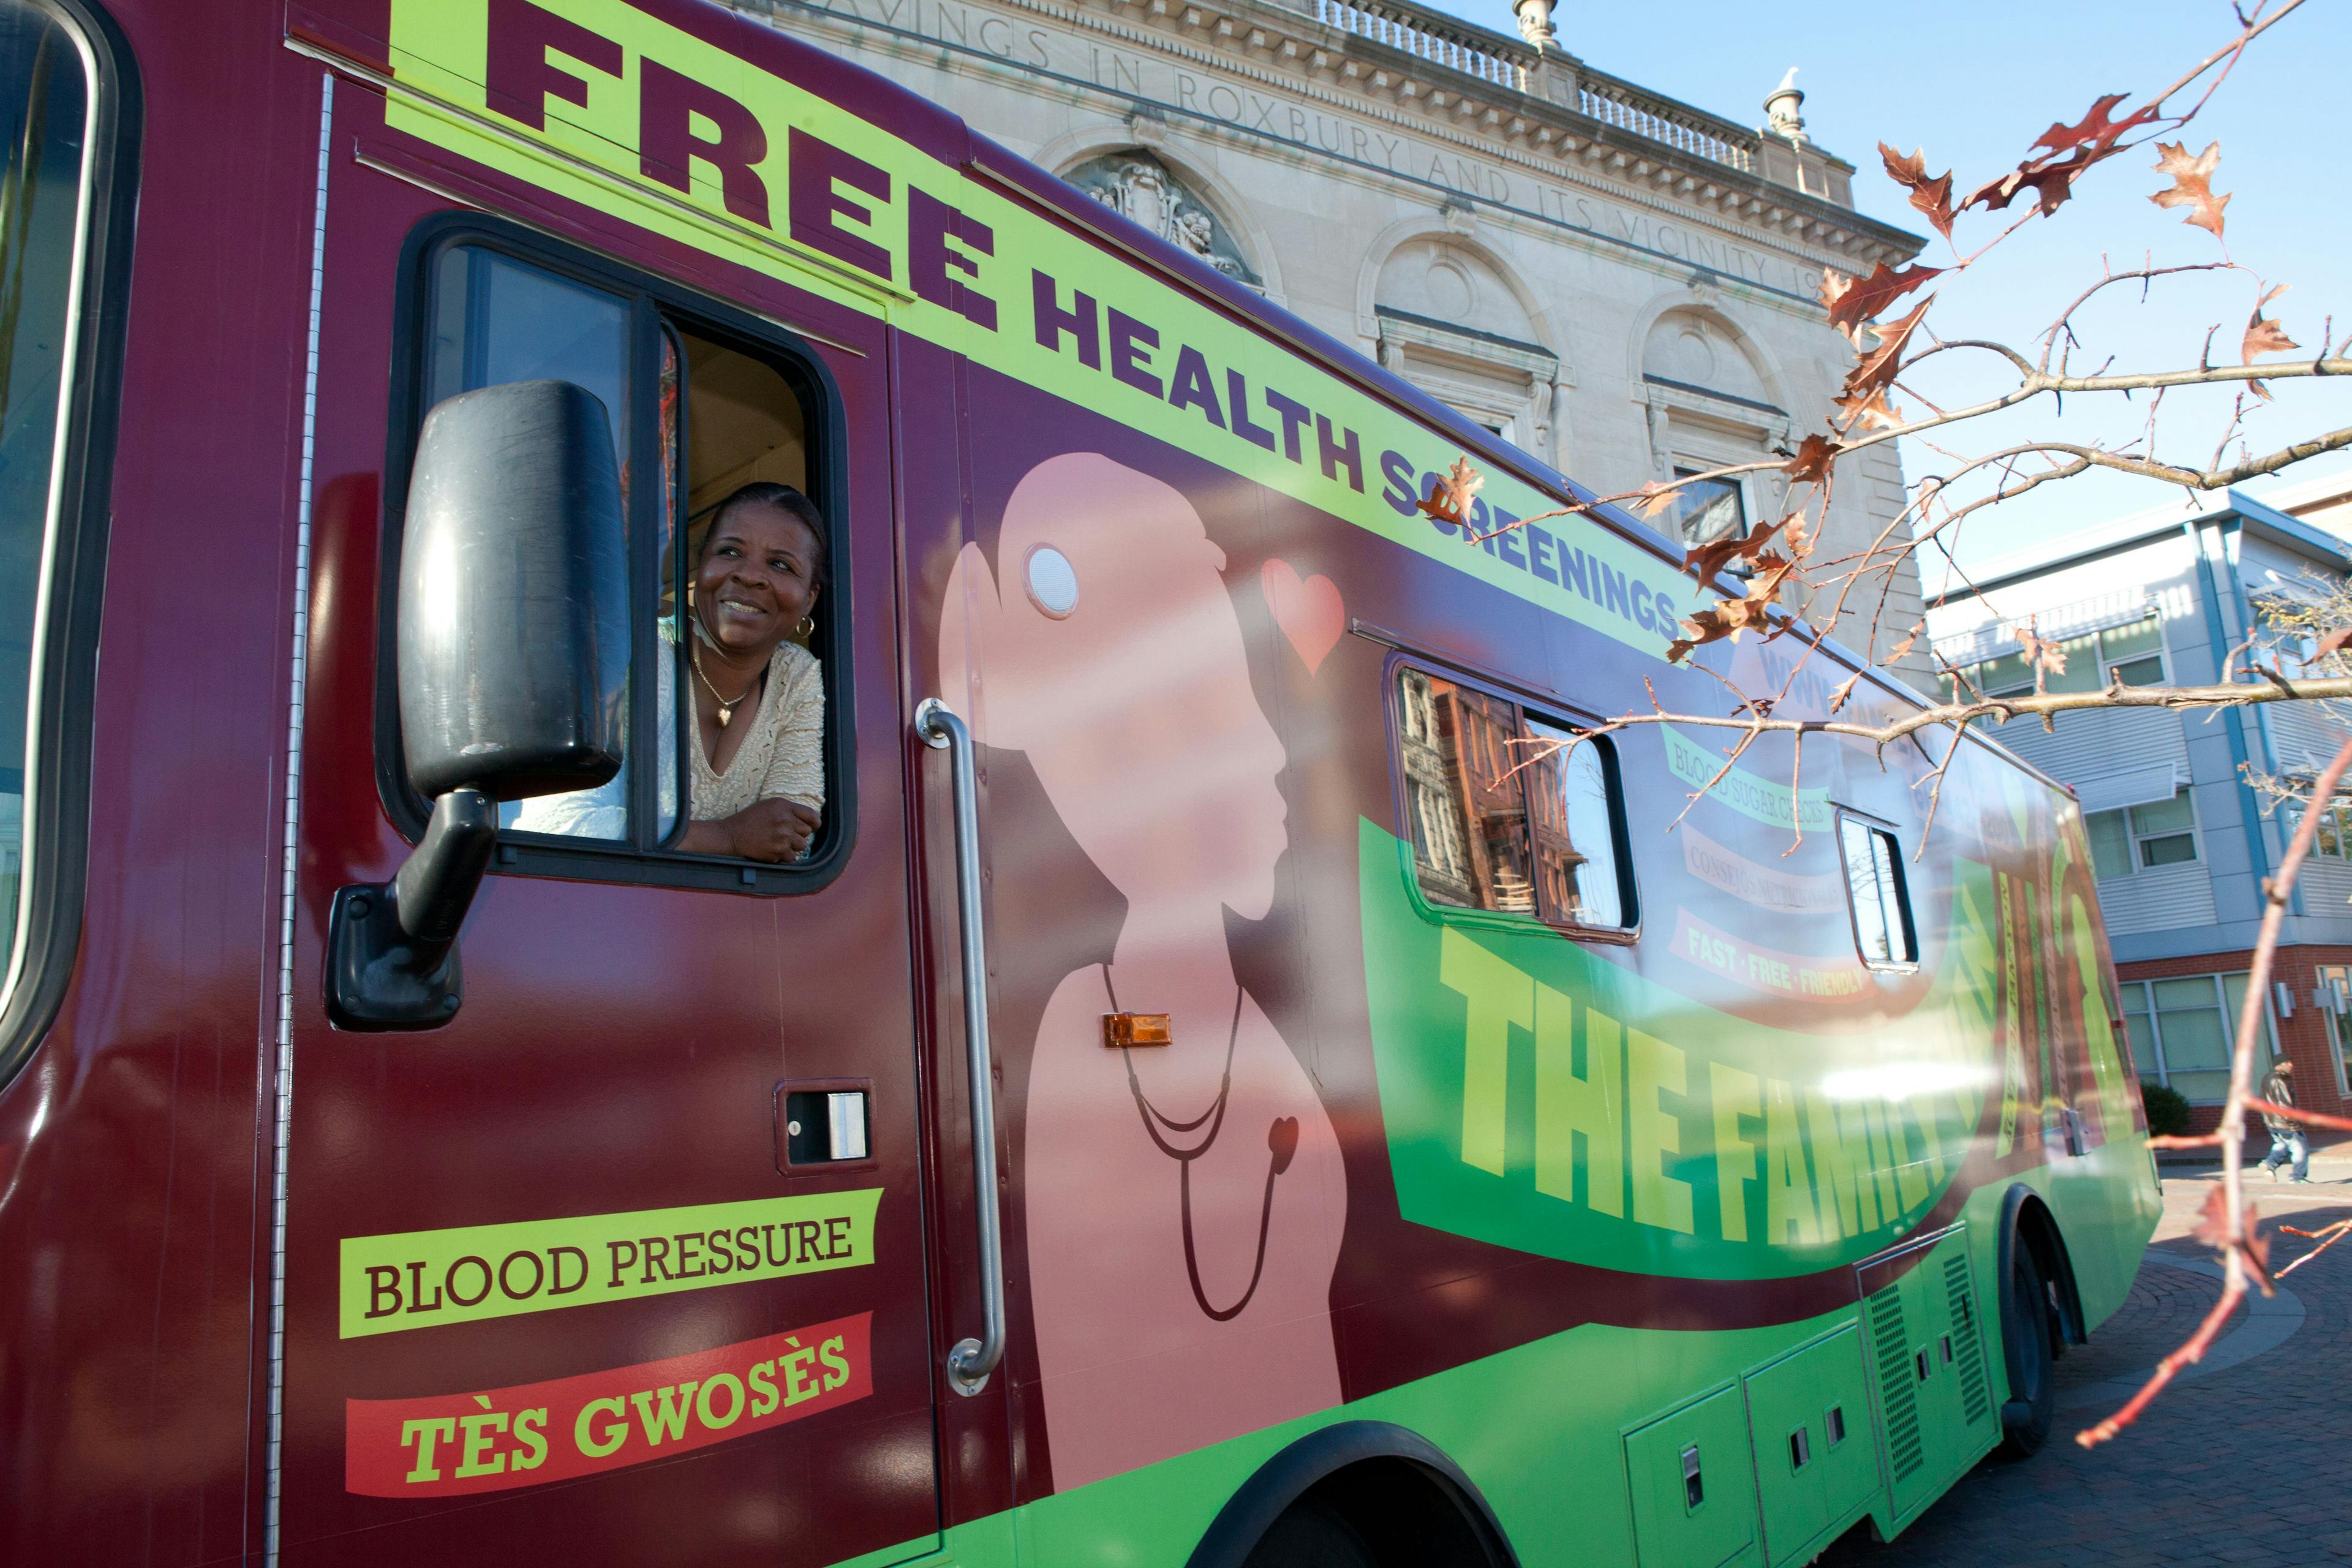 Mobile clinics can address health equity and cut costs